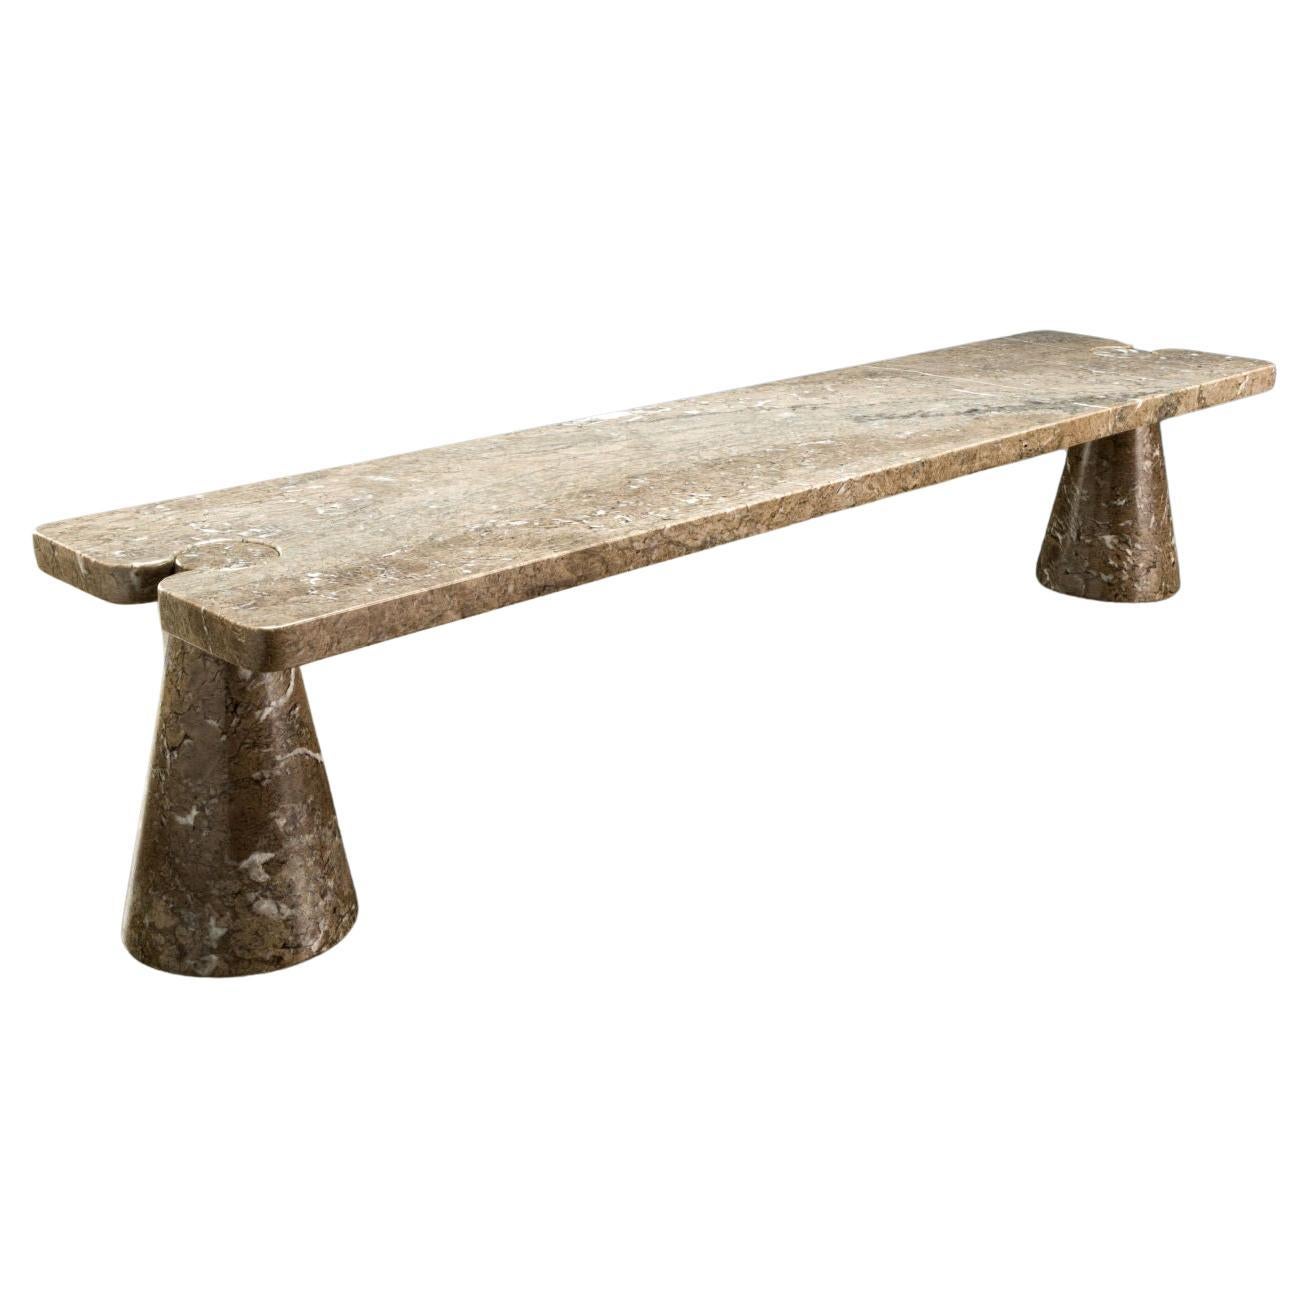 Angelo Mangiarotti 'Eros' series bench for Skipper in gray marble